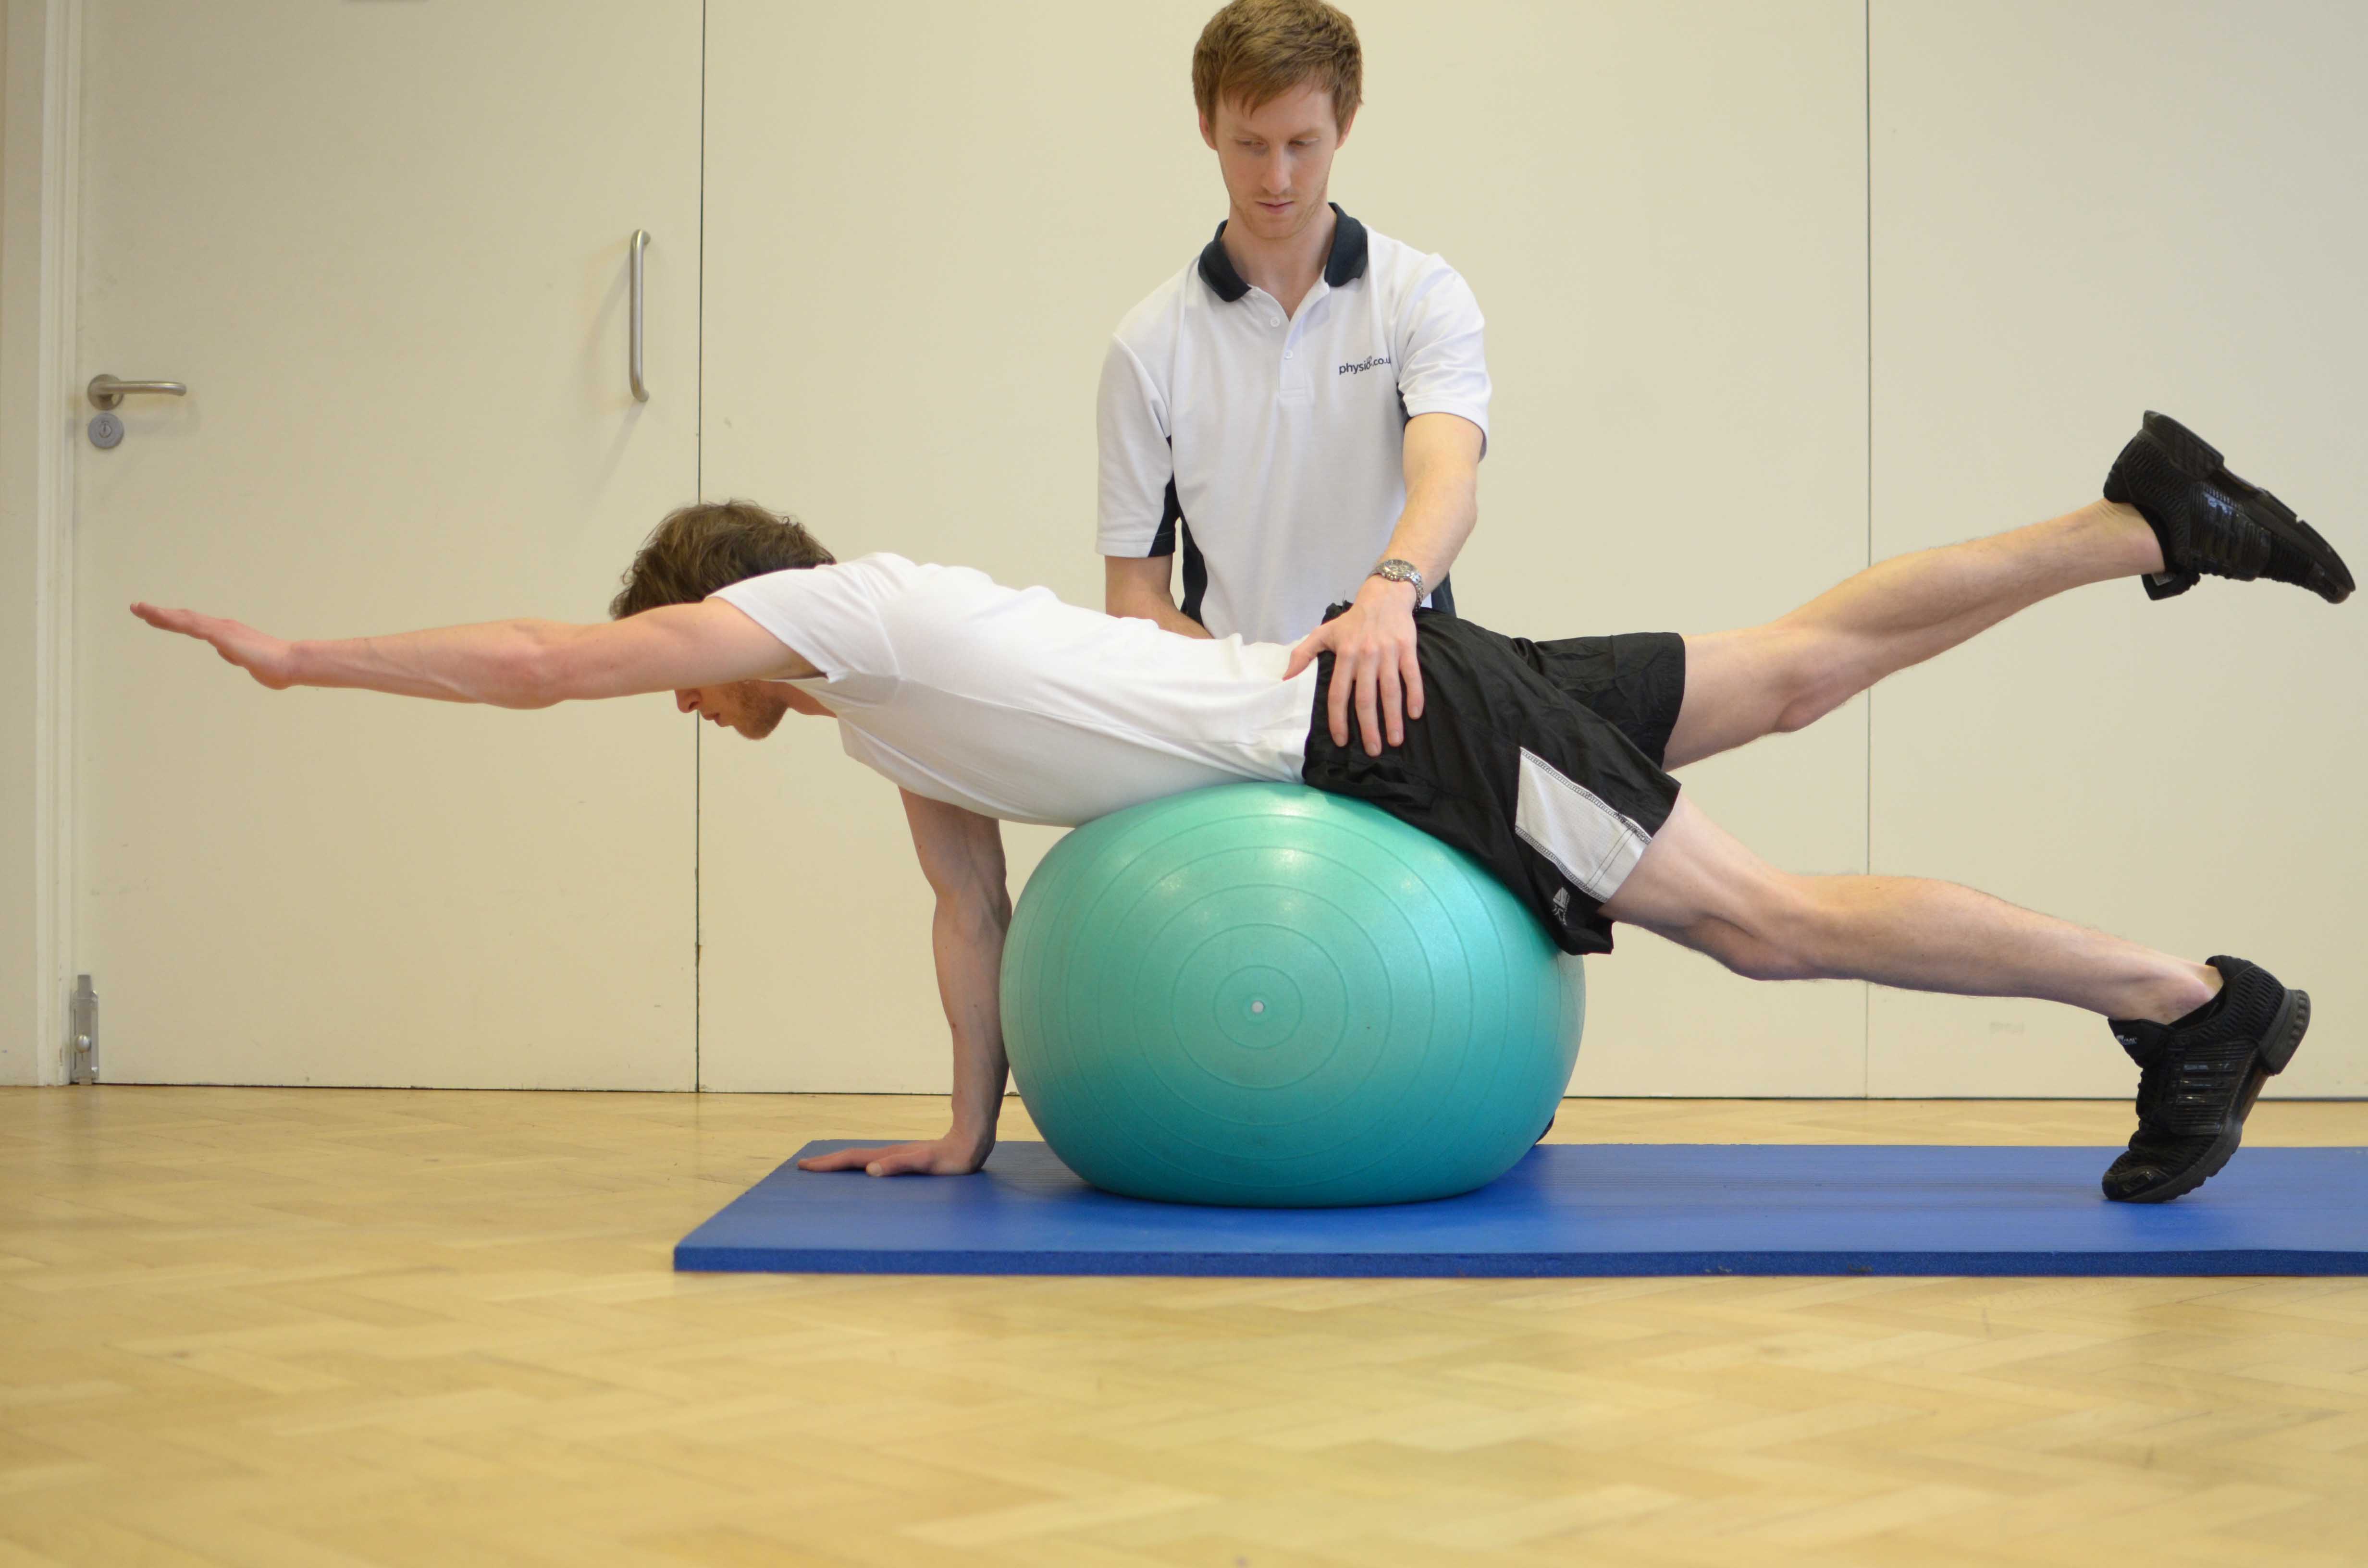 Progressive strengthening exercises for the lower back supervised by specialist MSK physiotherapist